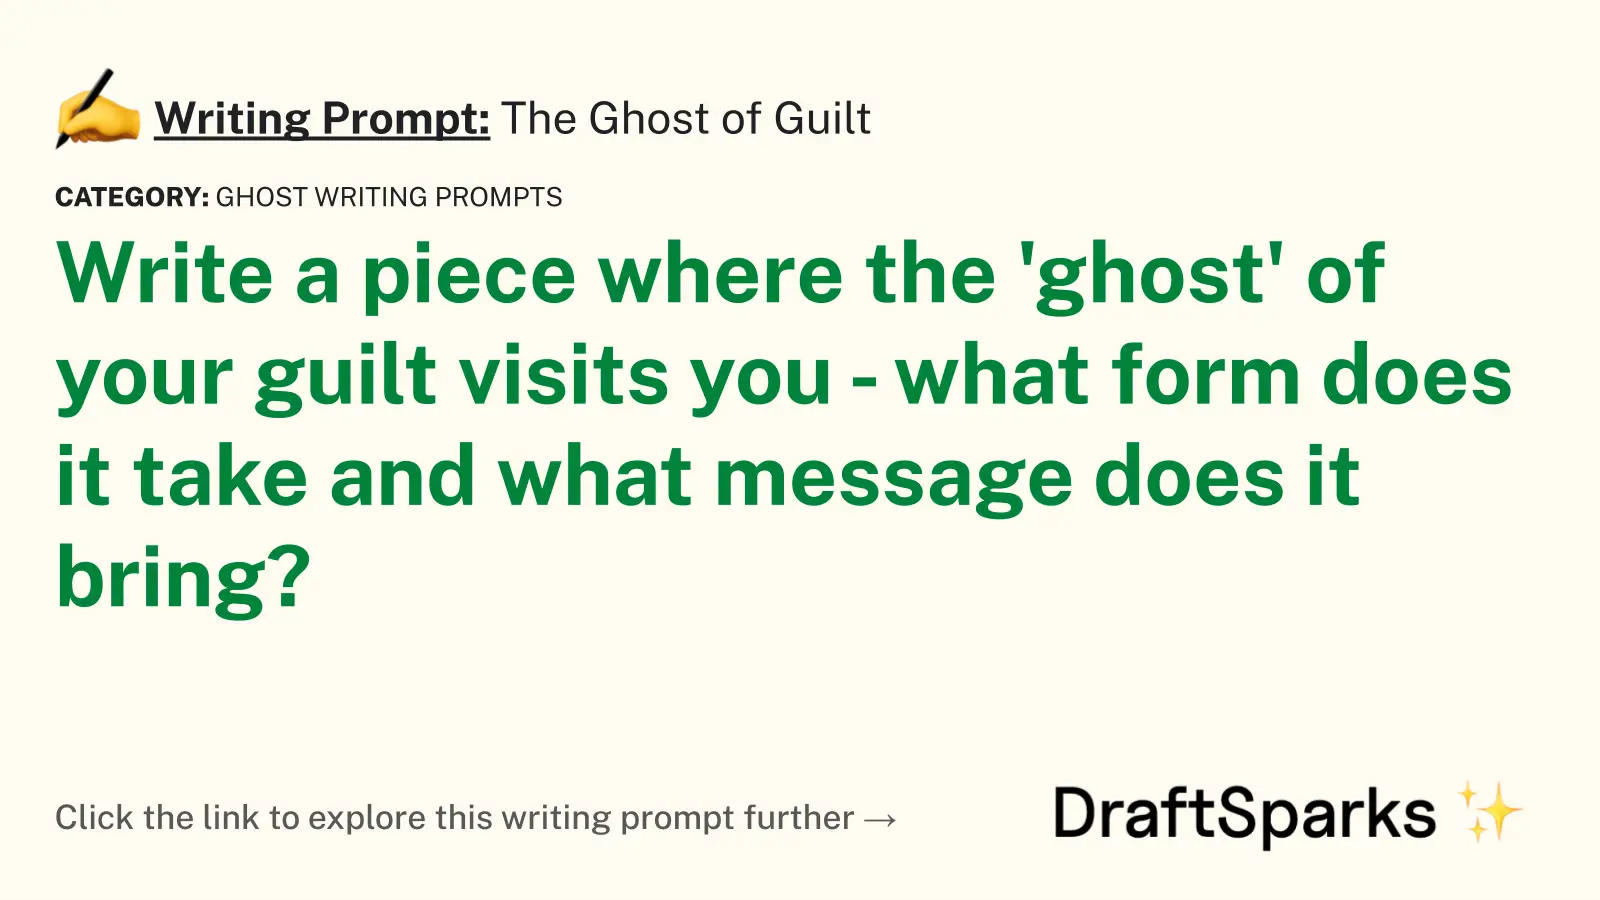 The Ghost of Guilt